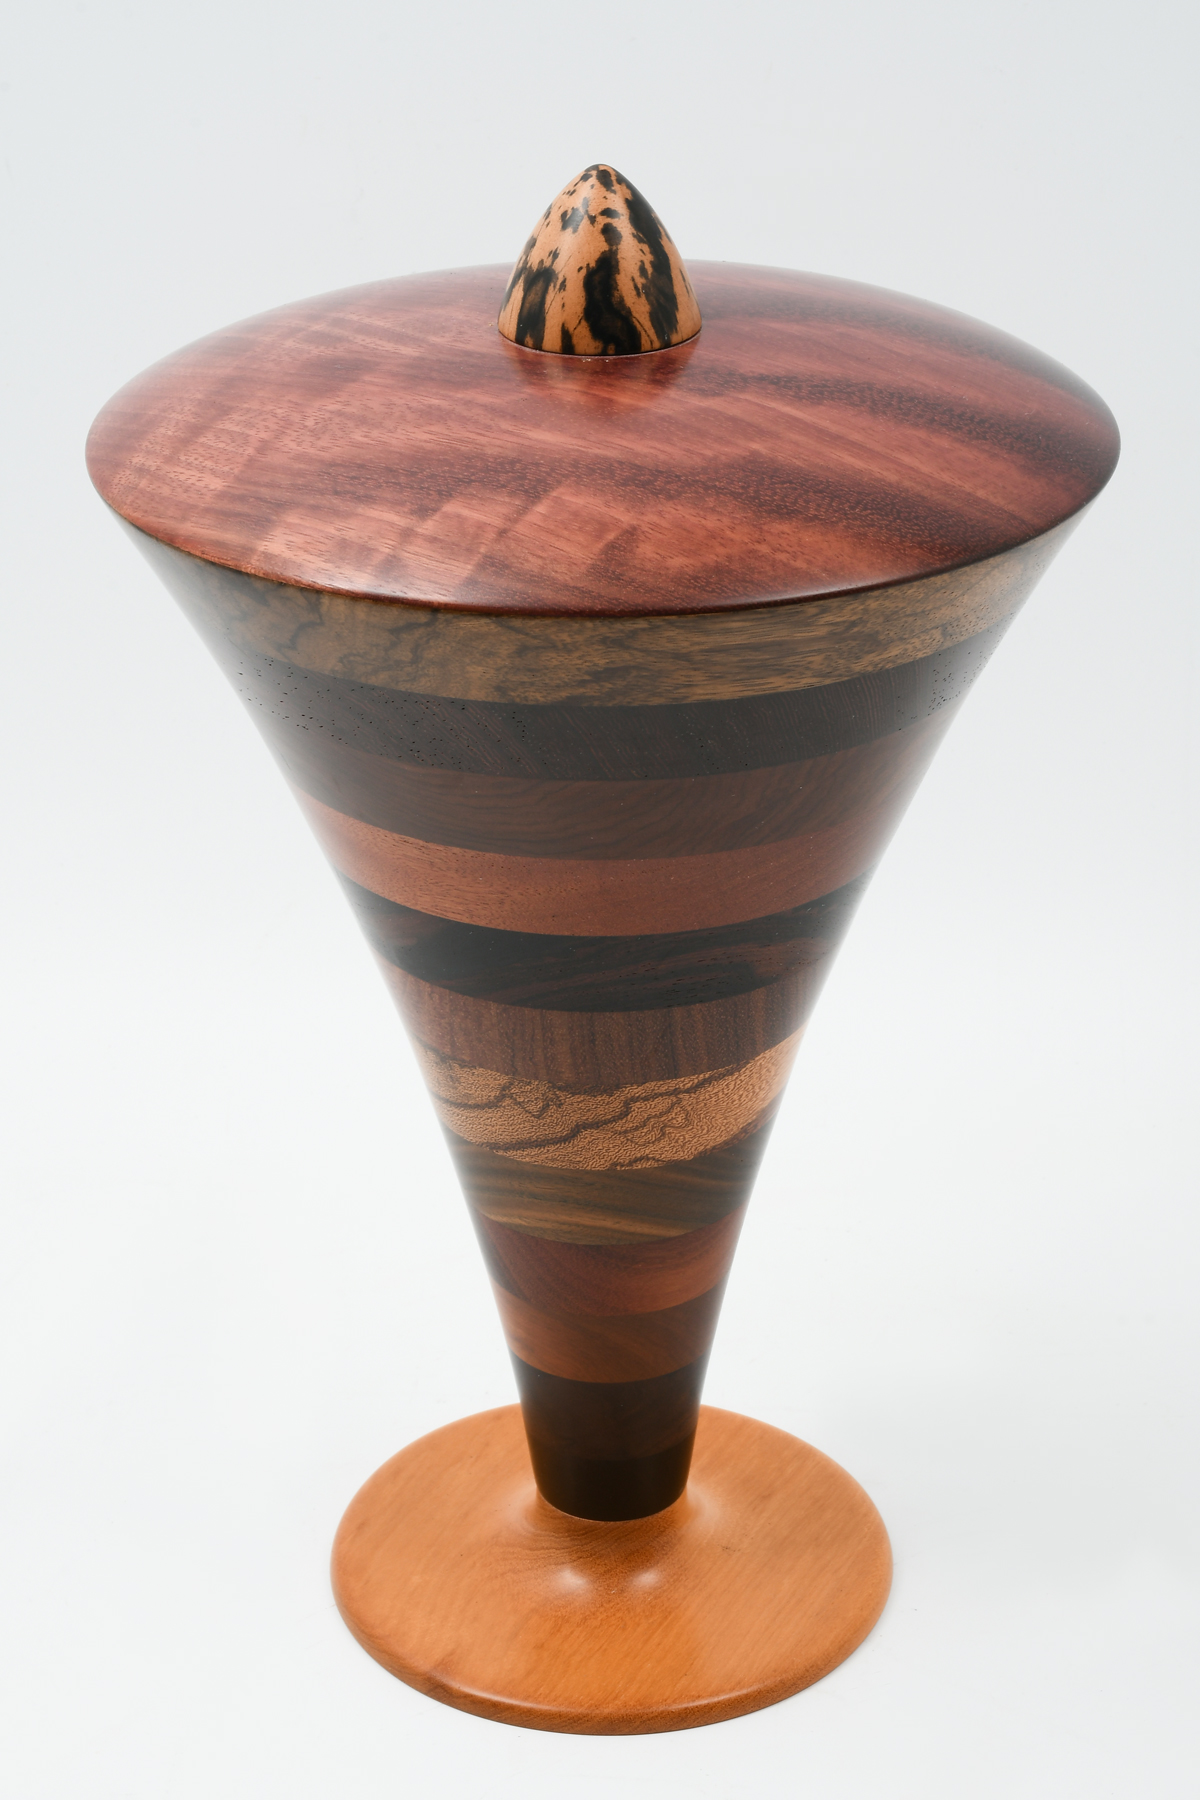 L. CHENEY MIXED EXOTIC TURNED WOOD SCULPTURE: